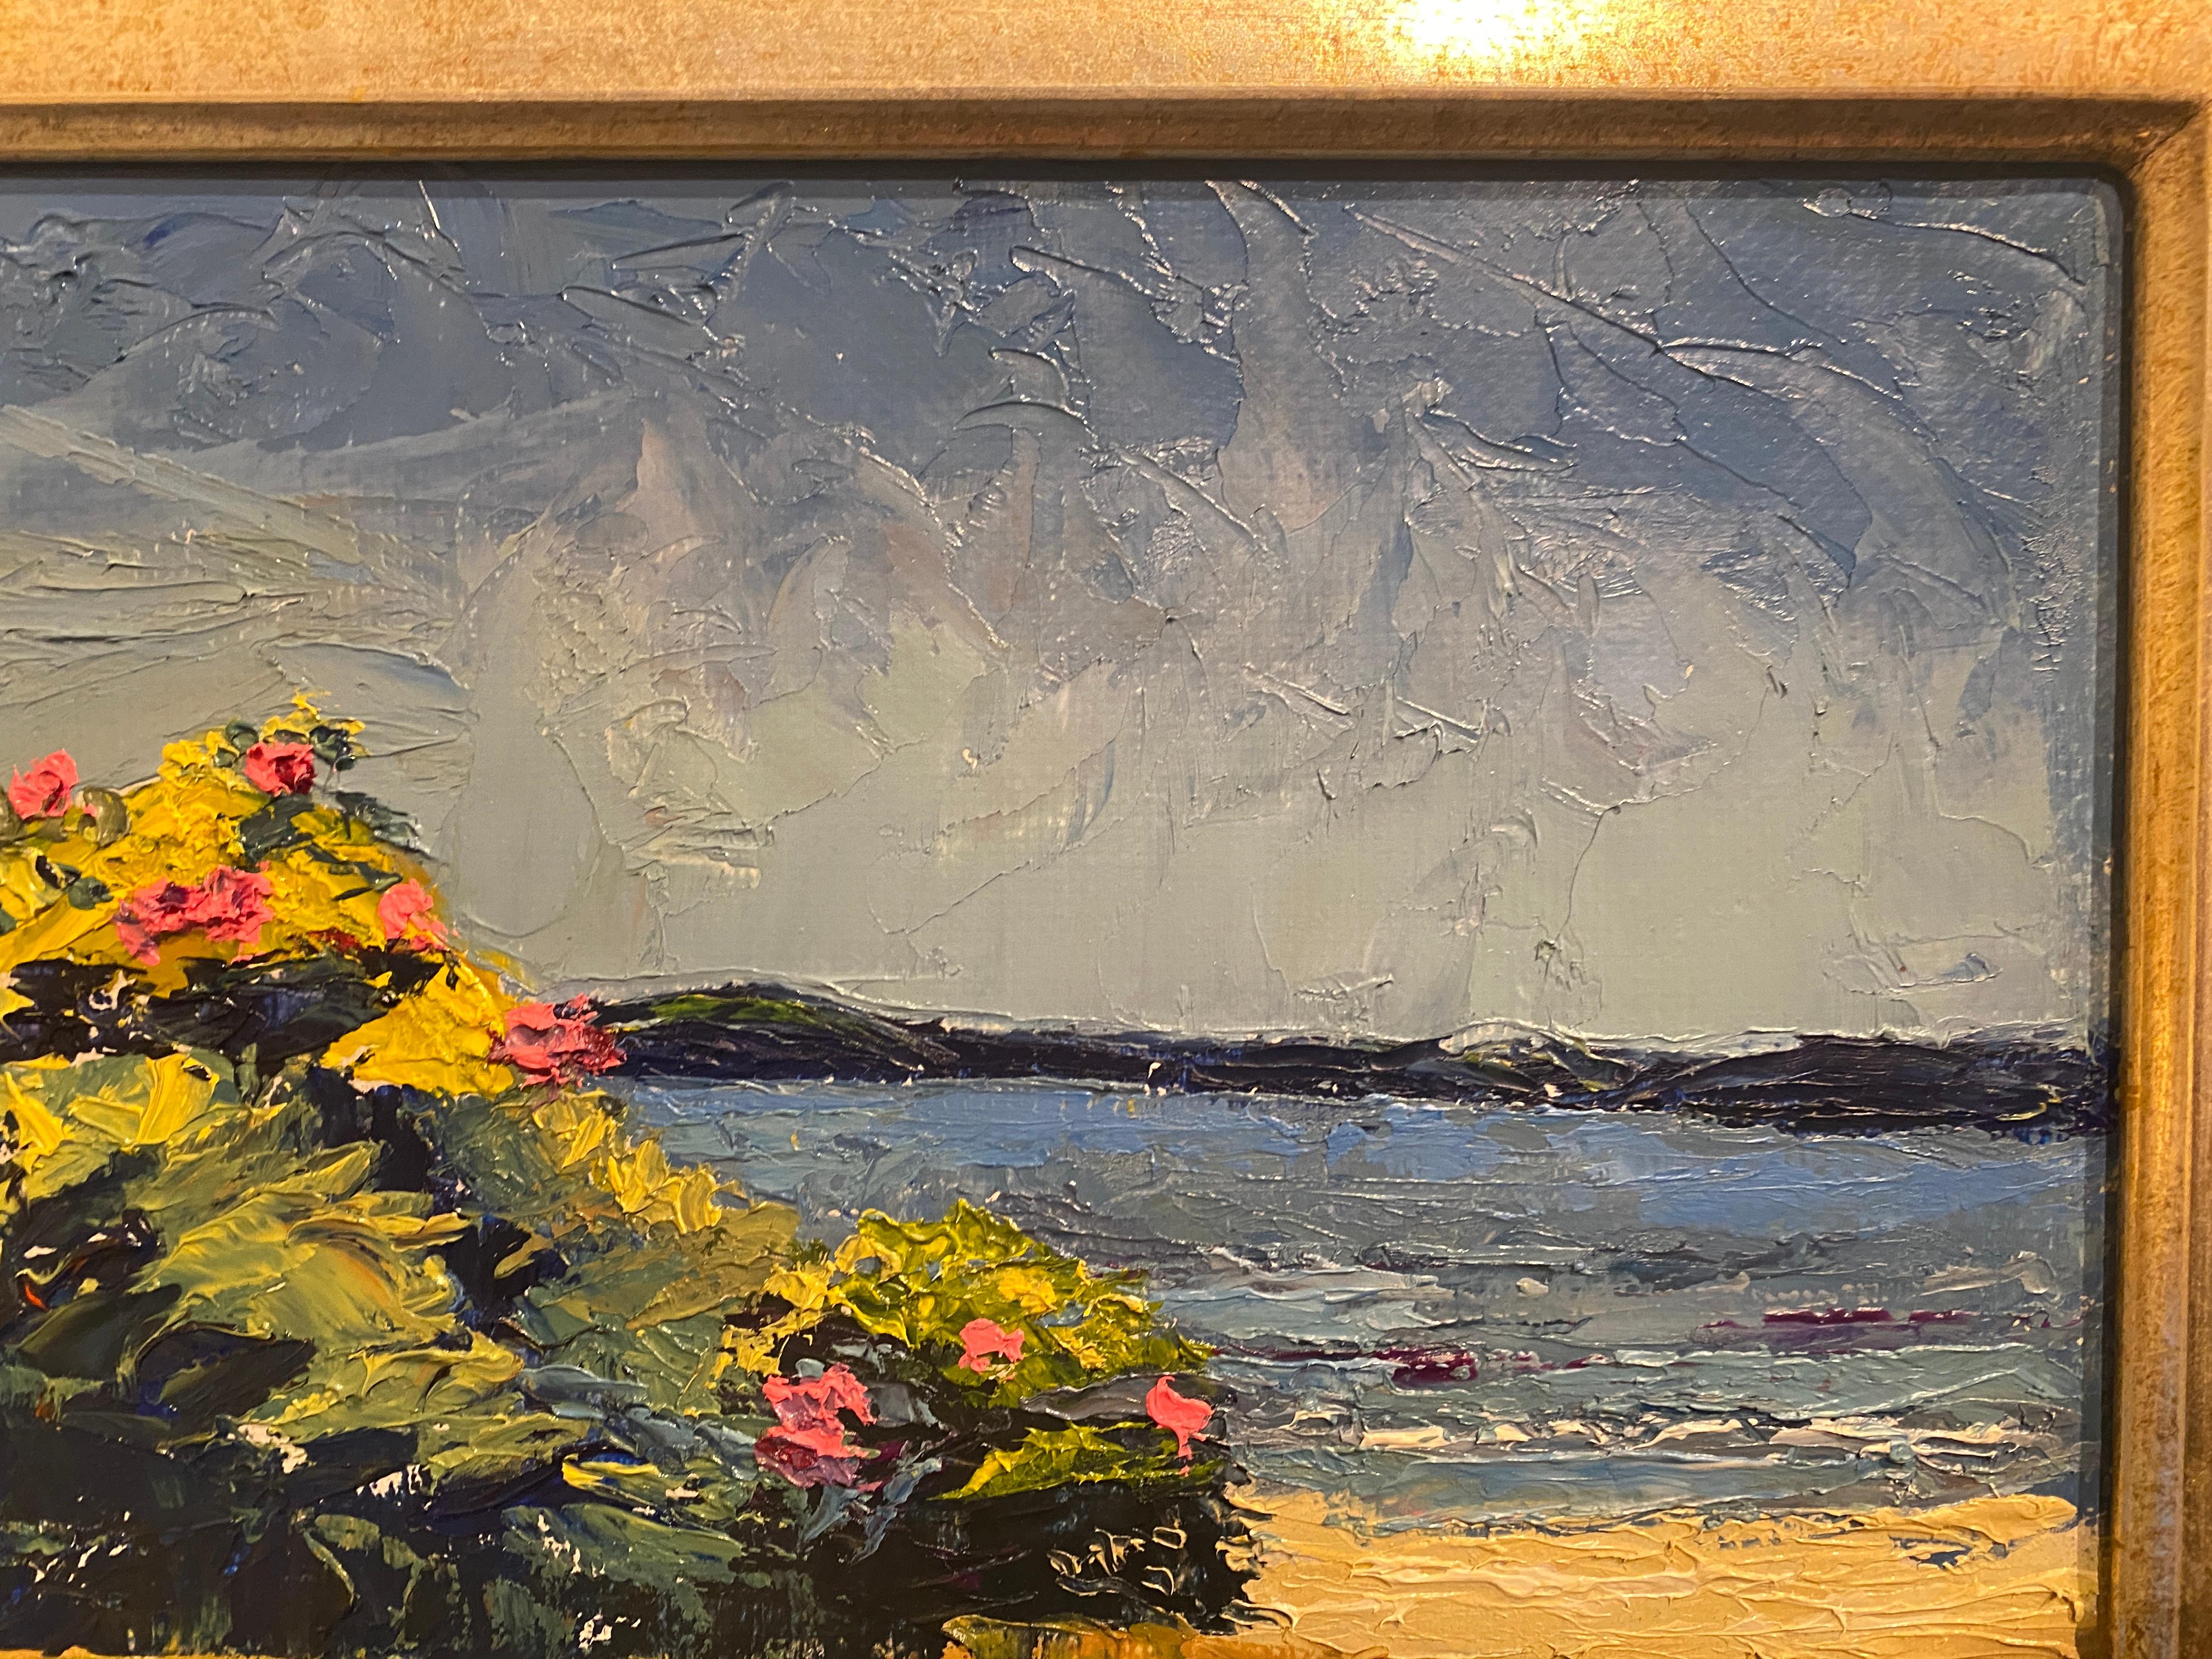 Oil Painting of a rose bush, on a bright sunny day. Crisp blues make up the sky above, the horizon meets distant land across a body of water. bright greens and yellows make up a verdant bush, whit spots of hot pink roses. Sandy dunes make up the